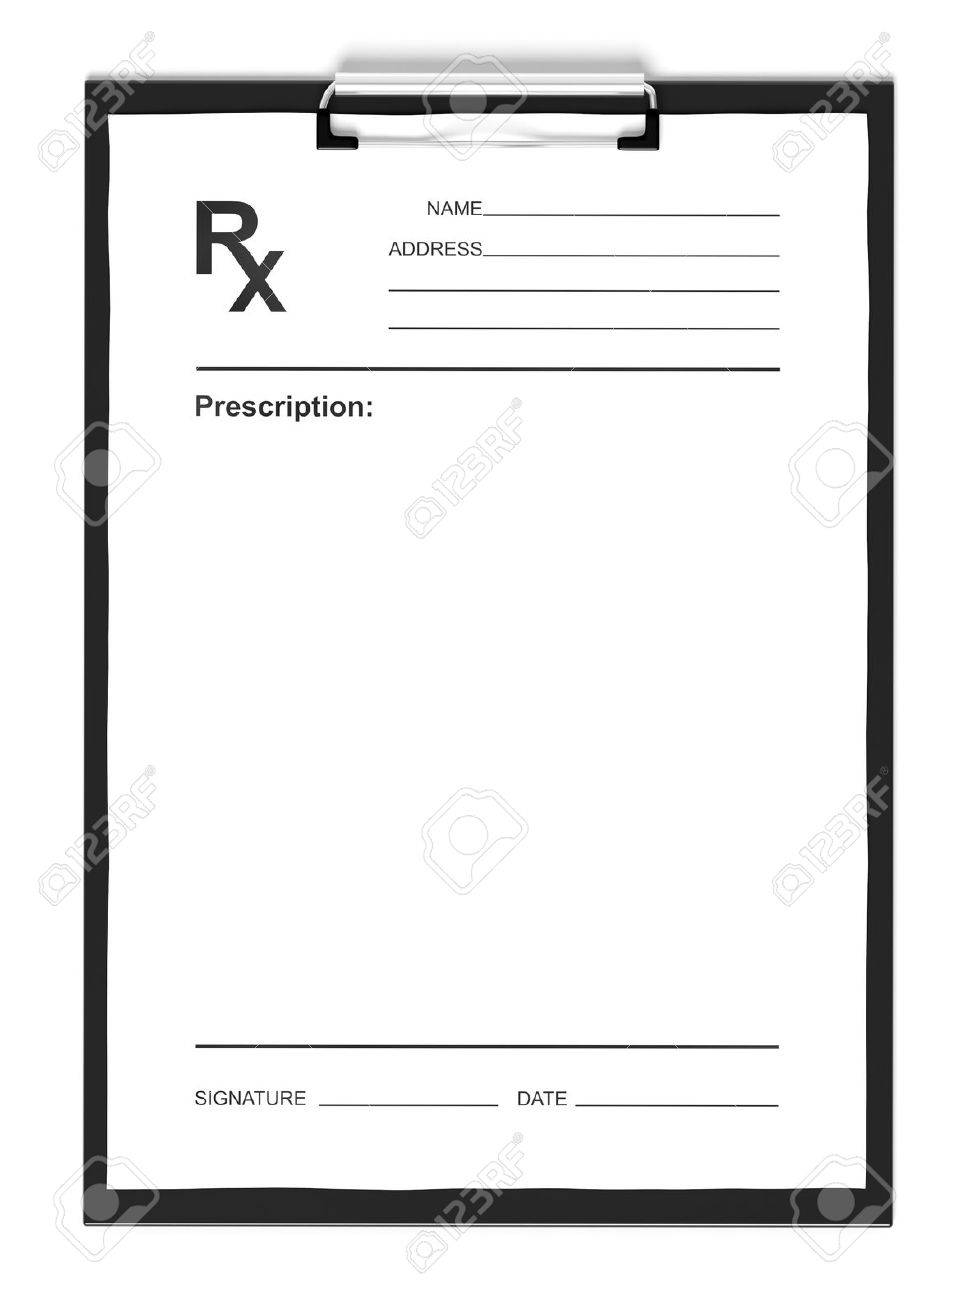 Blank Prescription Form Isolated On White Background Stock Photo